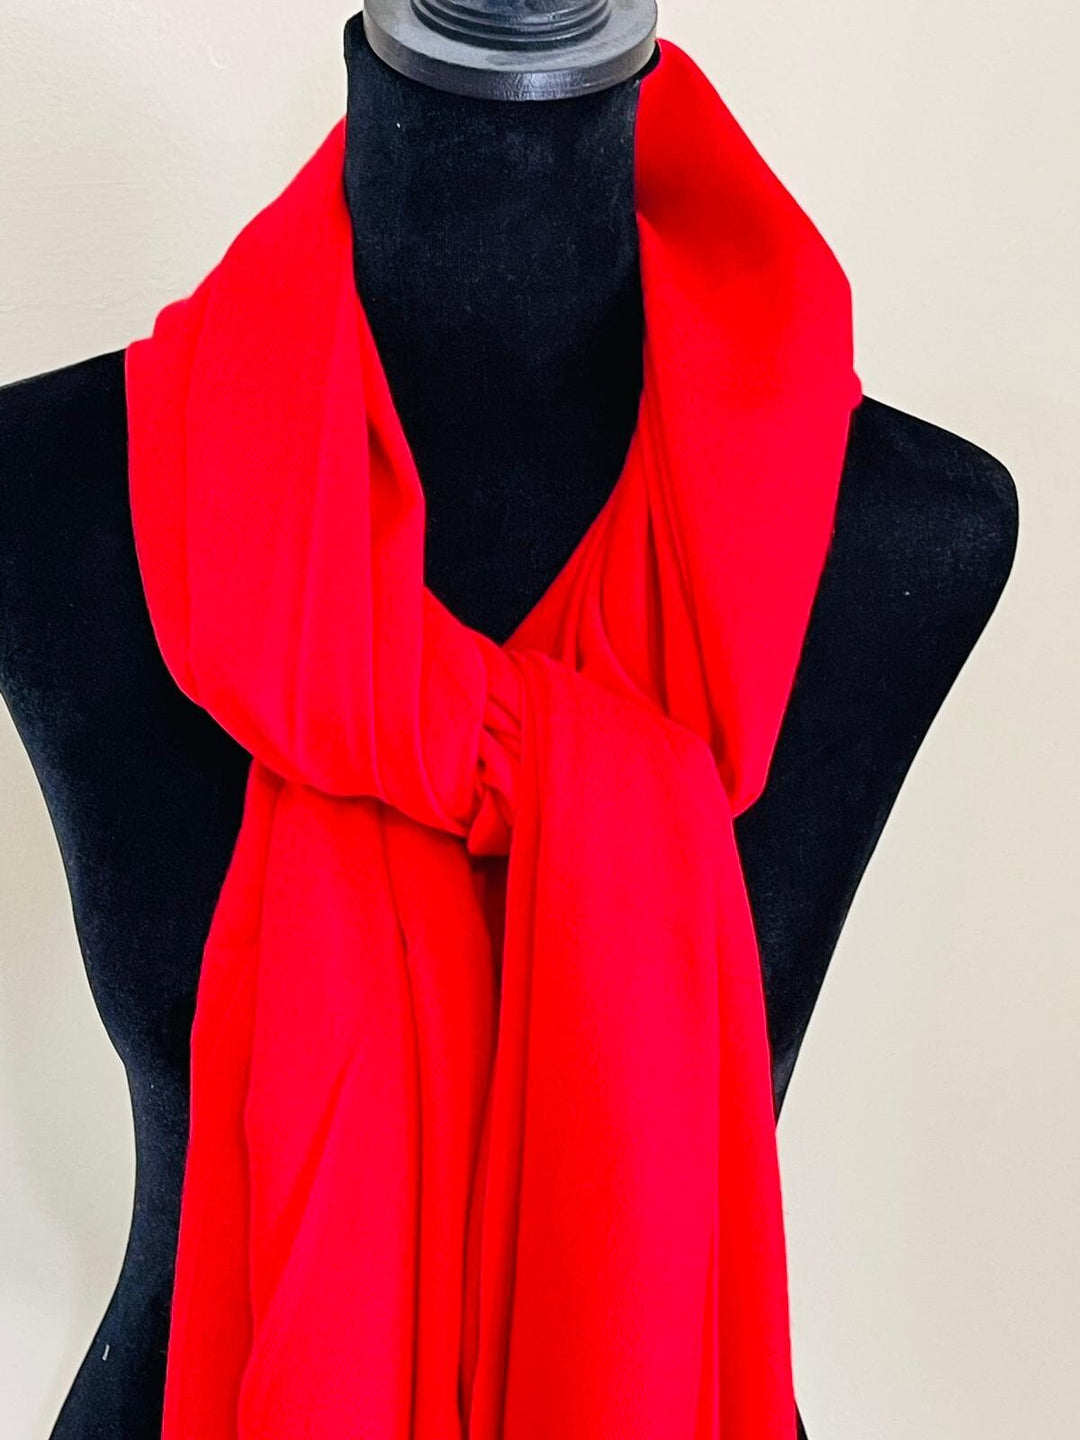 Cashmere Winter Scarf - Luxurious and Stylish Warmth